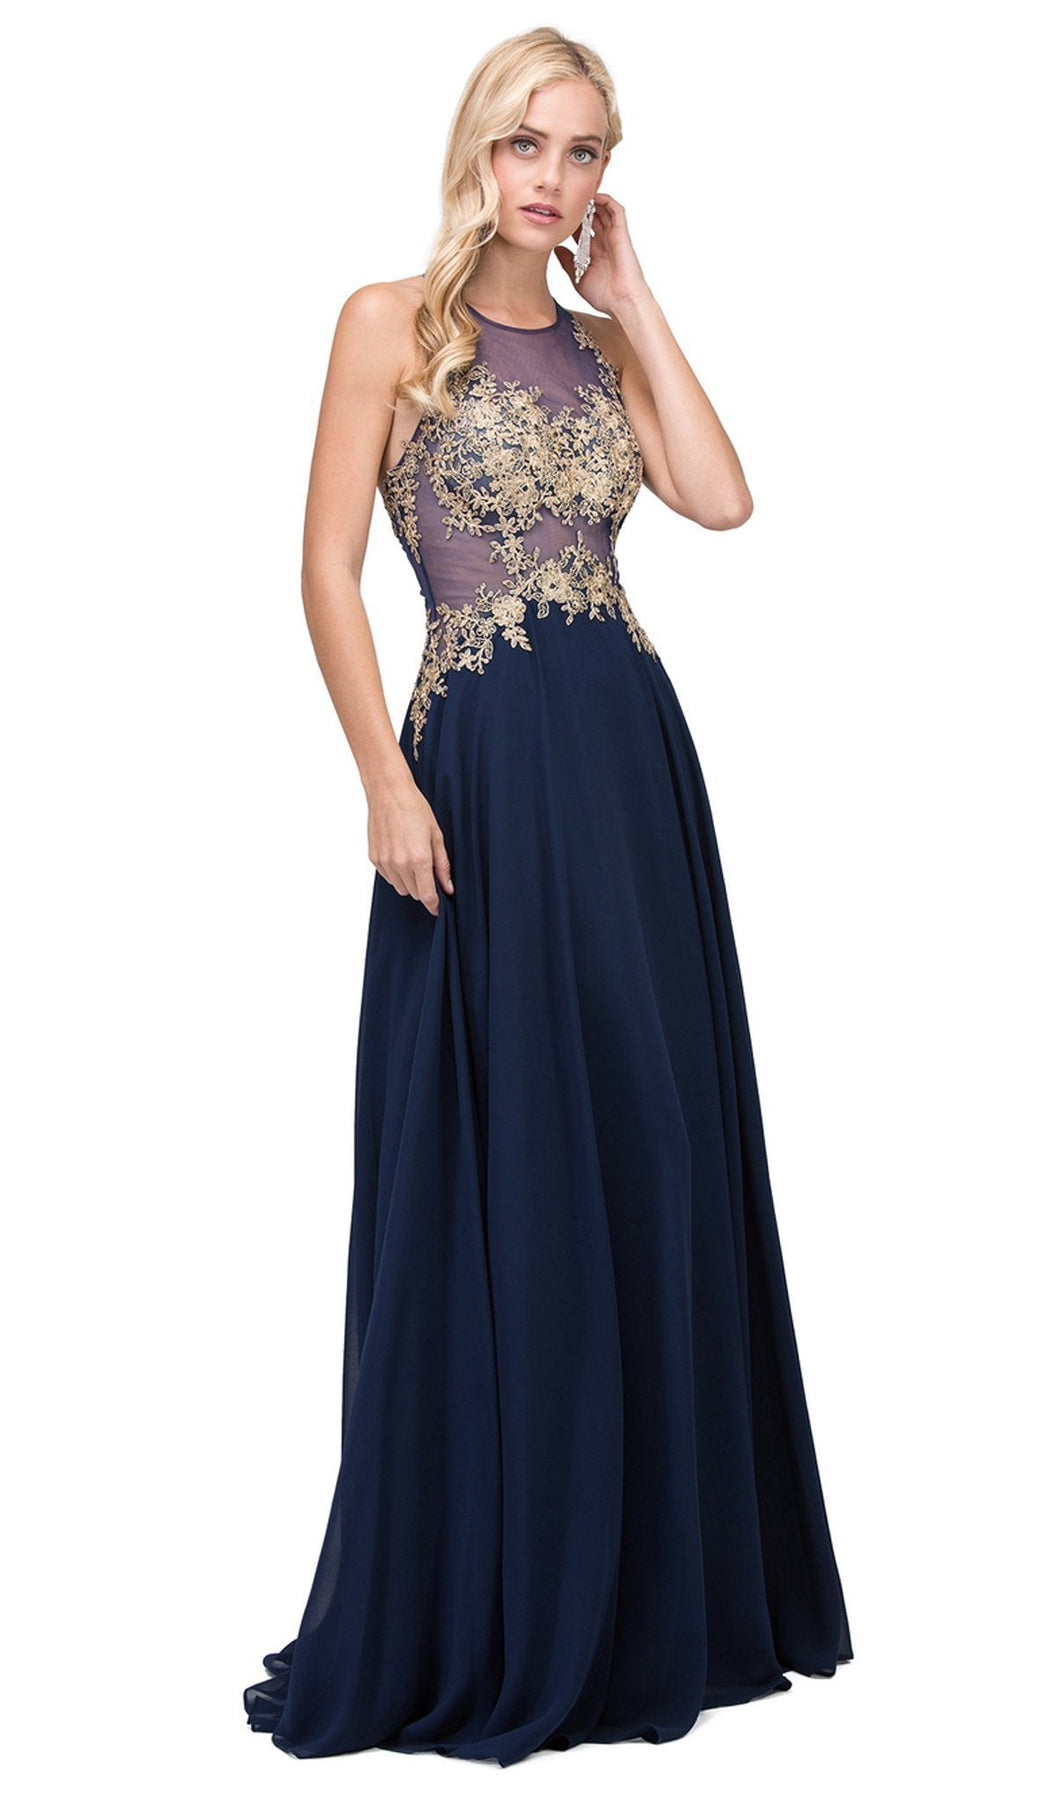 Dancing Queen - 2297 Sheer Embroidered Pleated Prom Dress Special Occasion Dress XS / Navy